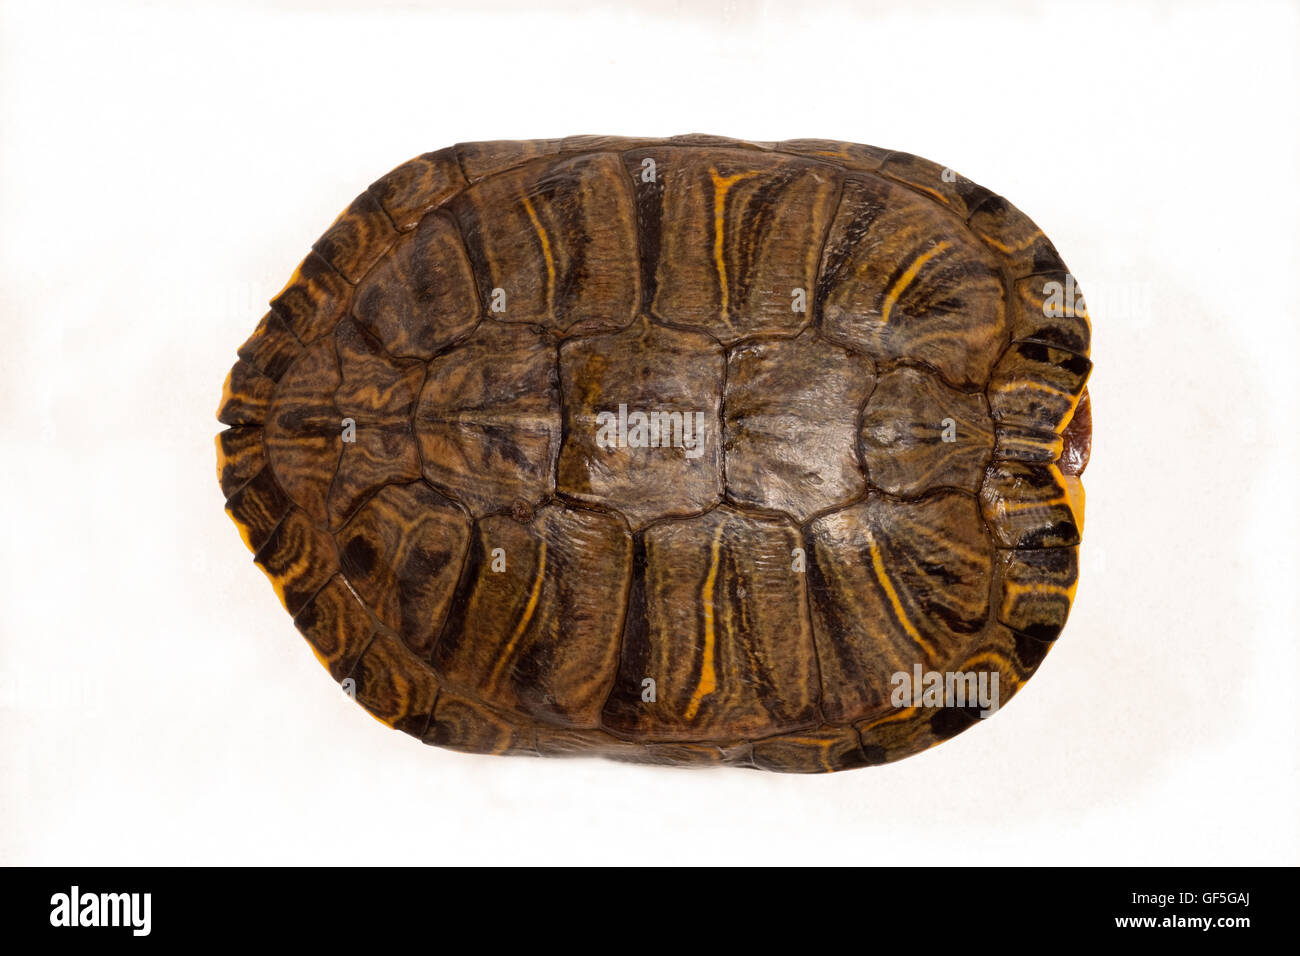 Red-eared Turtle (Trachemys script elegans). Carapace or upper shell. Head end right. Museum specimen. Stock Photo